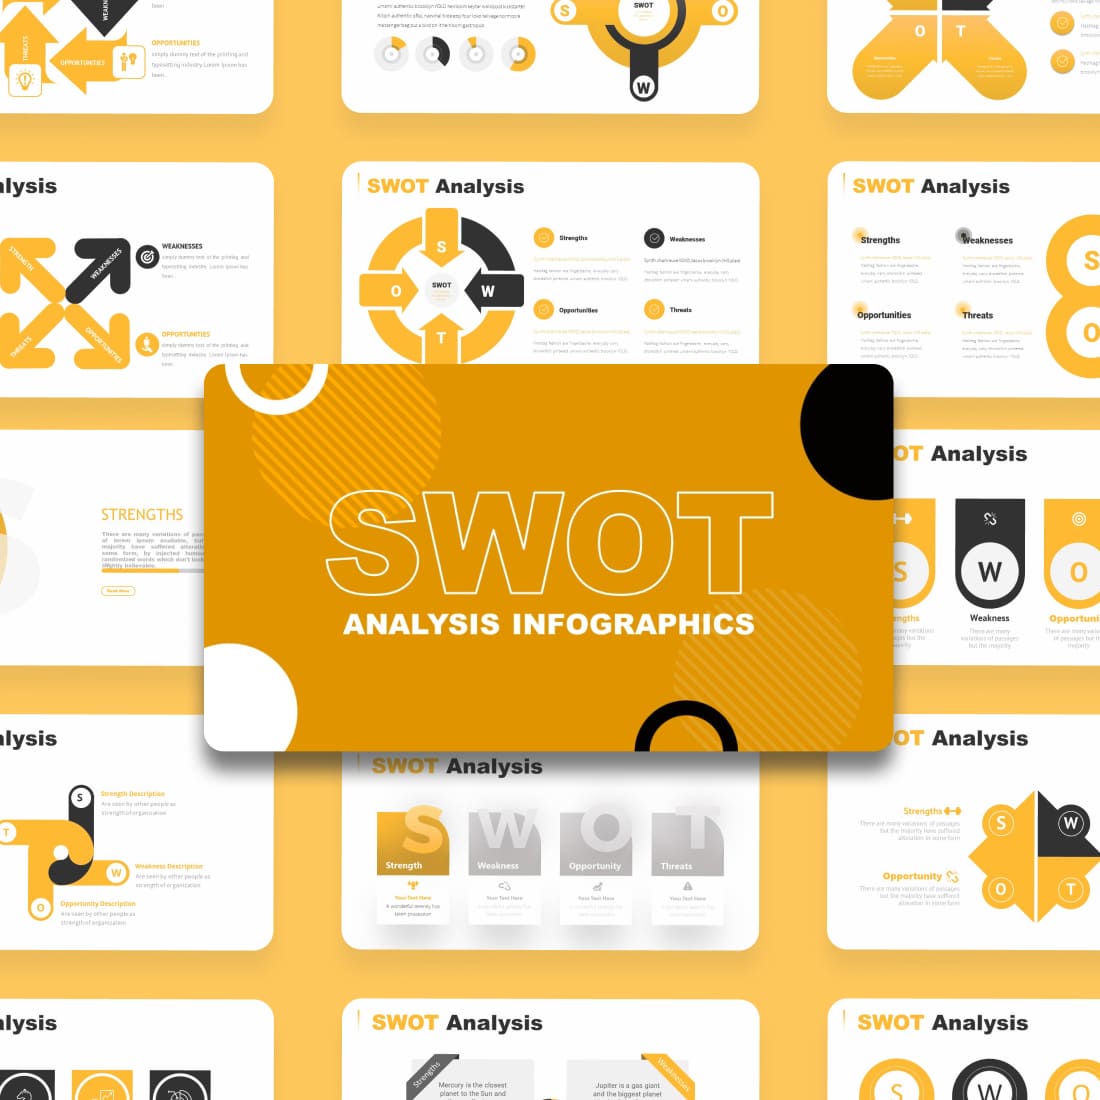 SWOT Urban Fashion Powerpoint Template: 50 Slides cover.